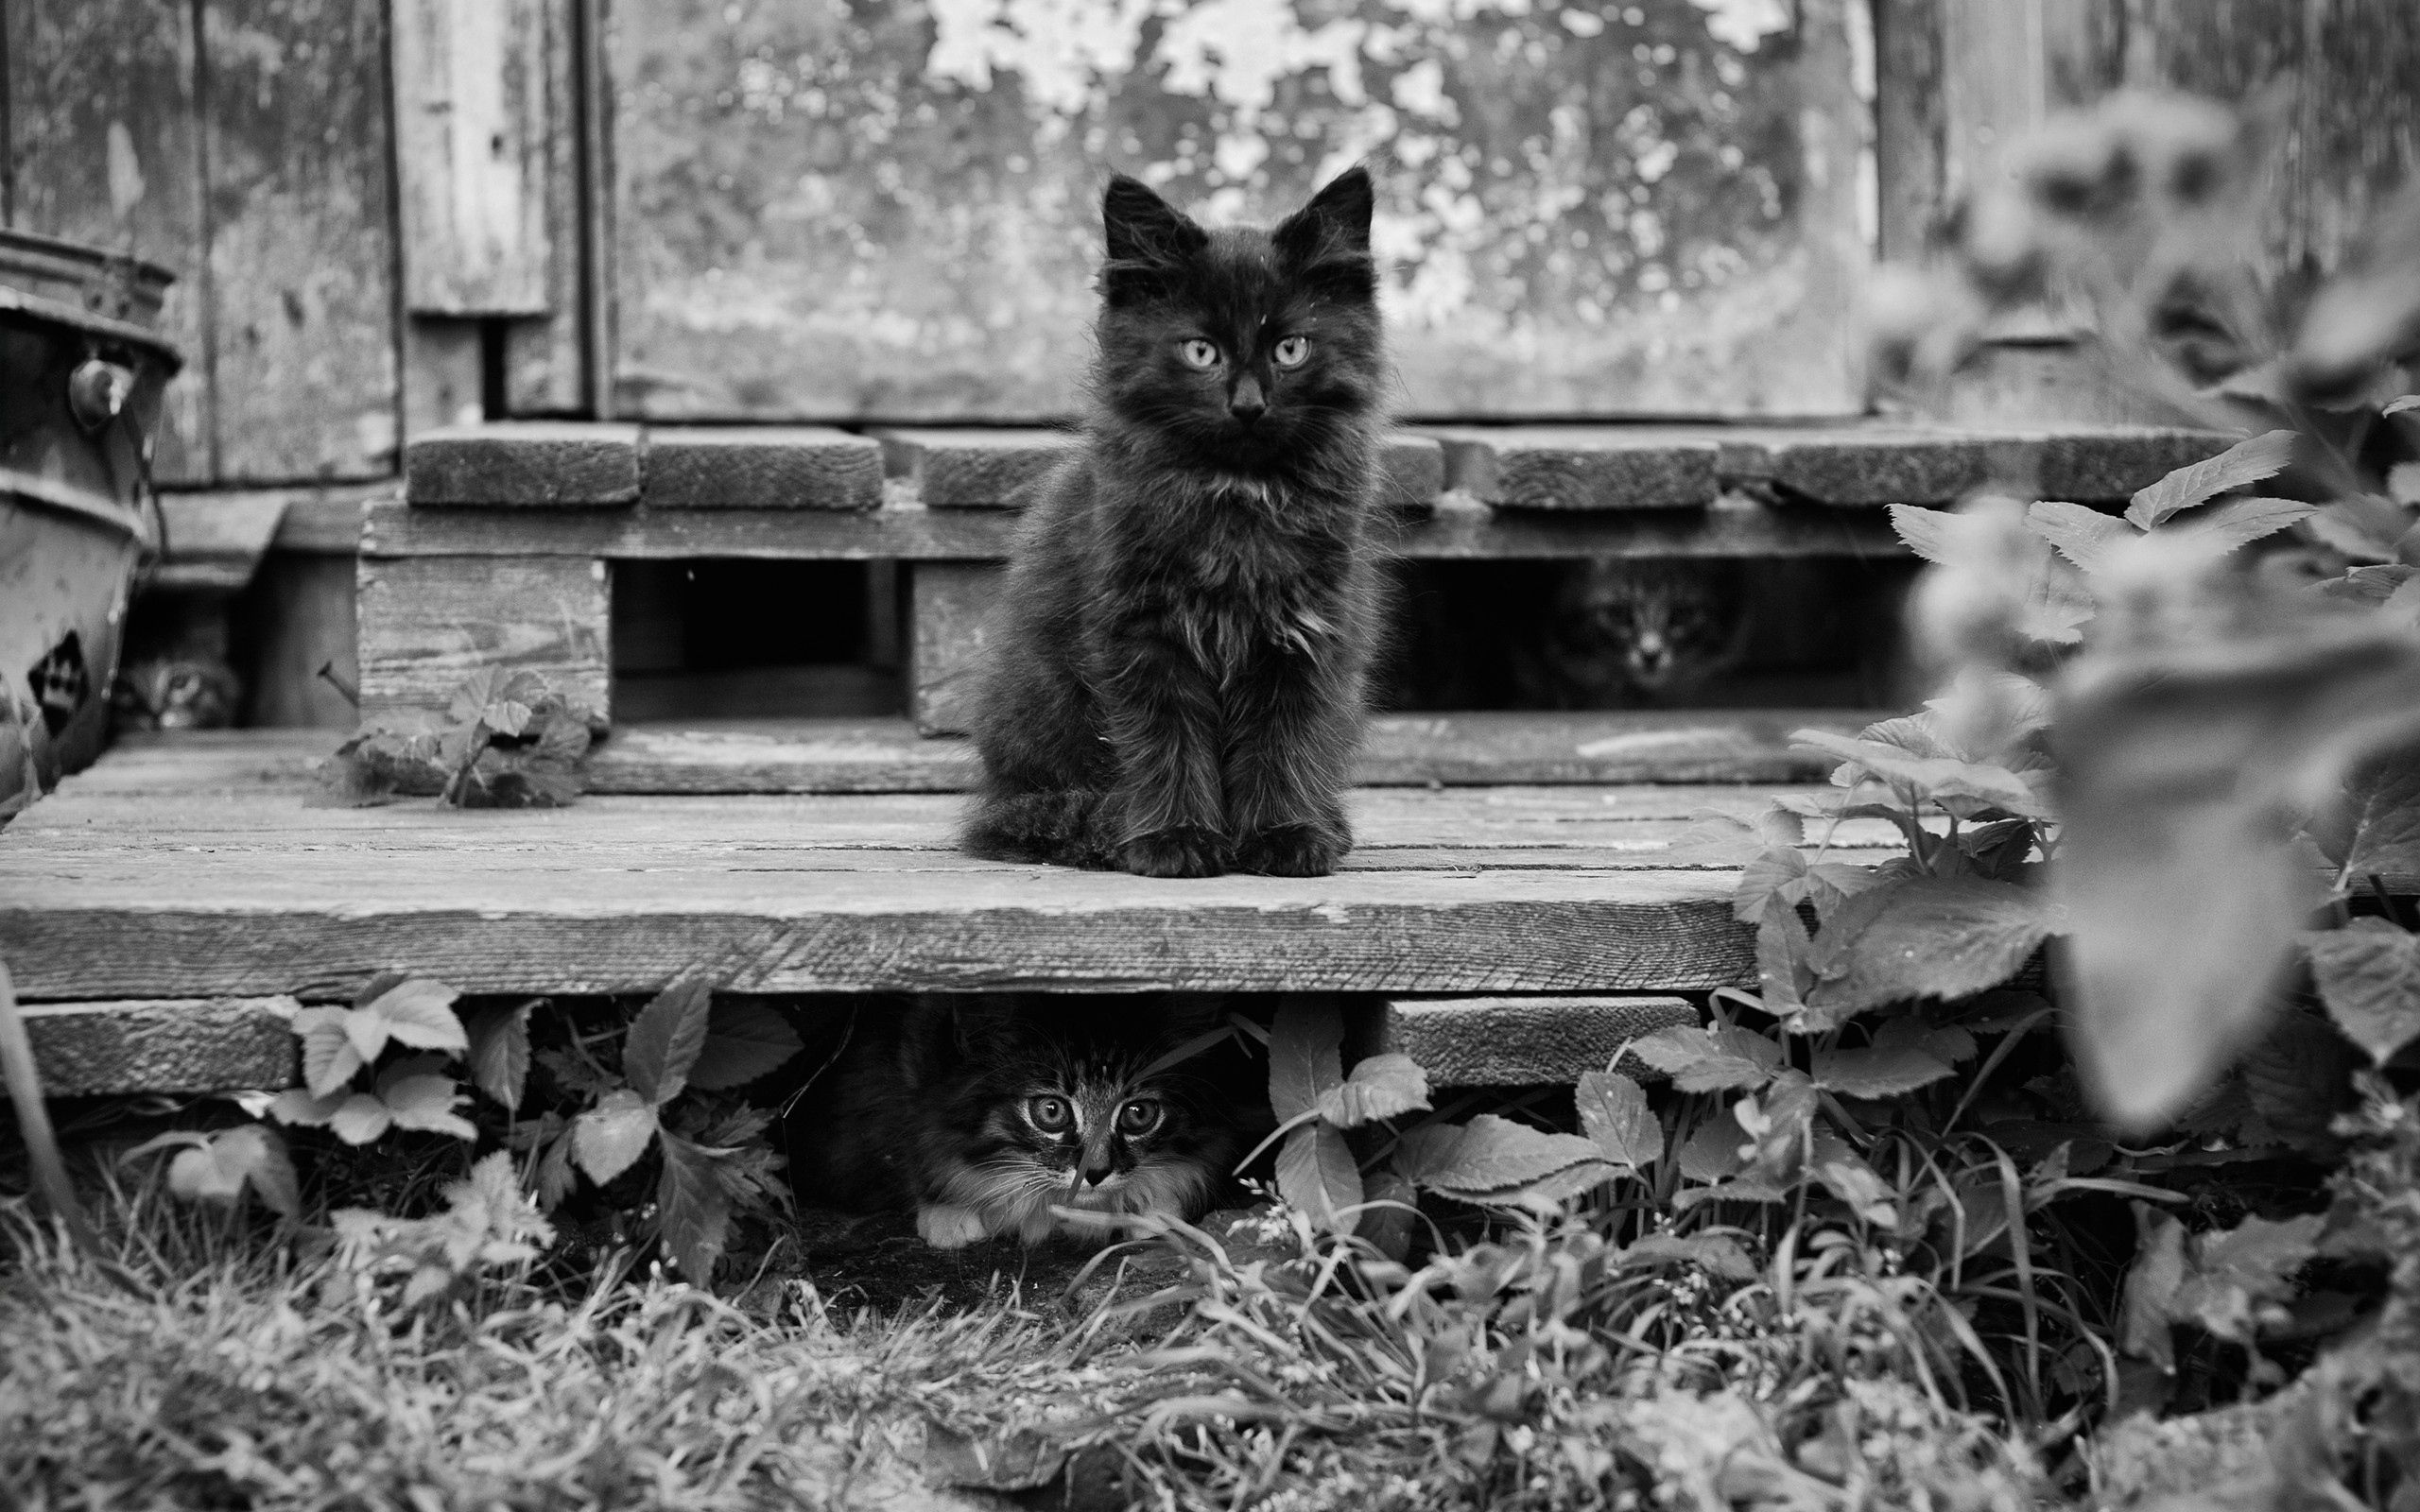 animals, sit, fluffy, kitty, kitten, hide, bw, chb, expectation, waiting, lots of, multitude